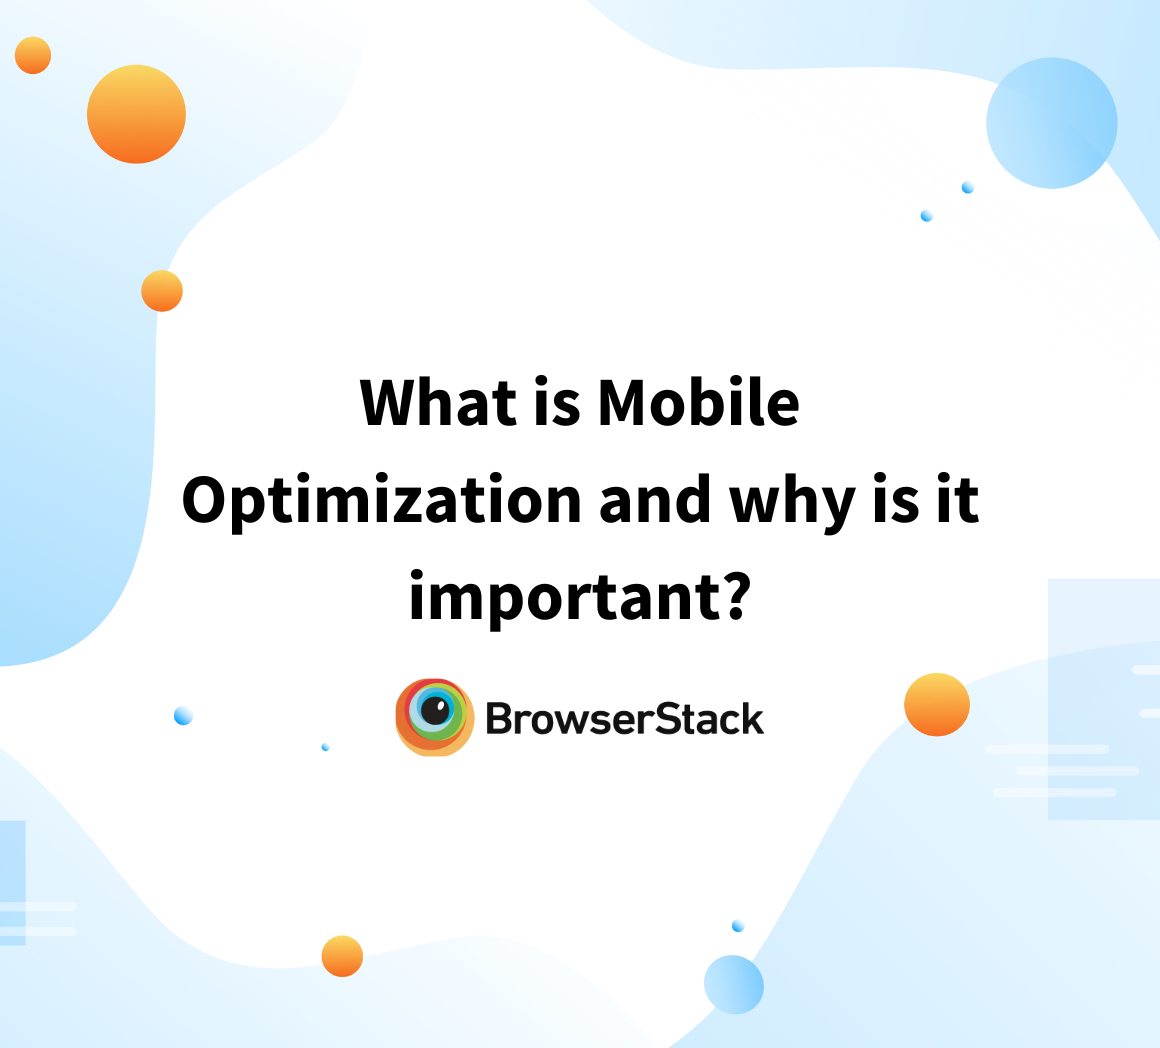 What is Mobile Optimization and why is it important